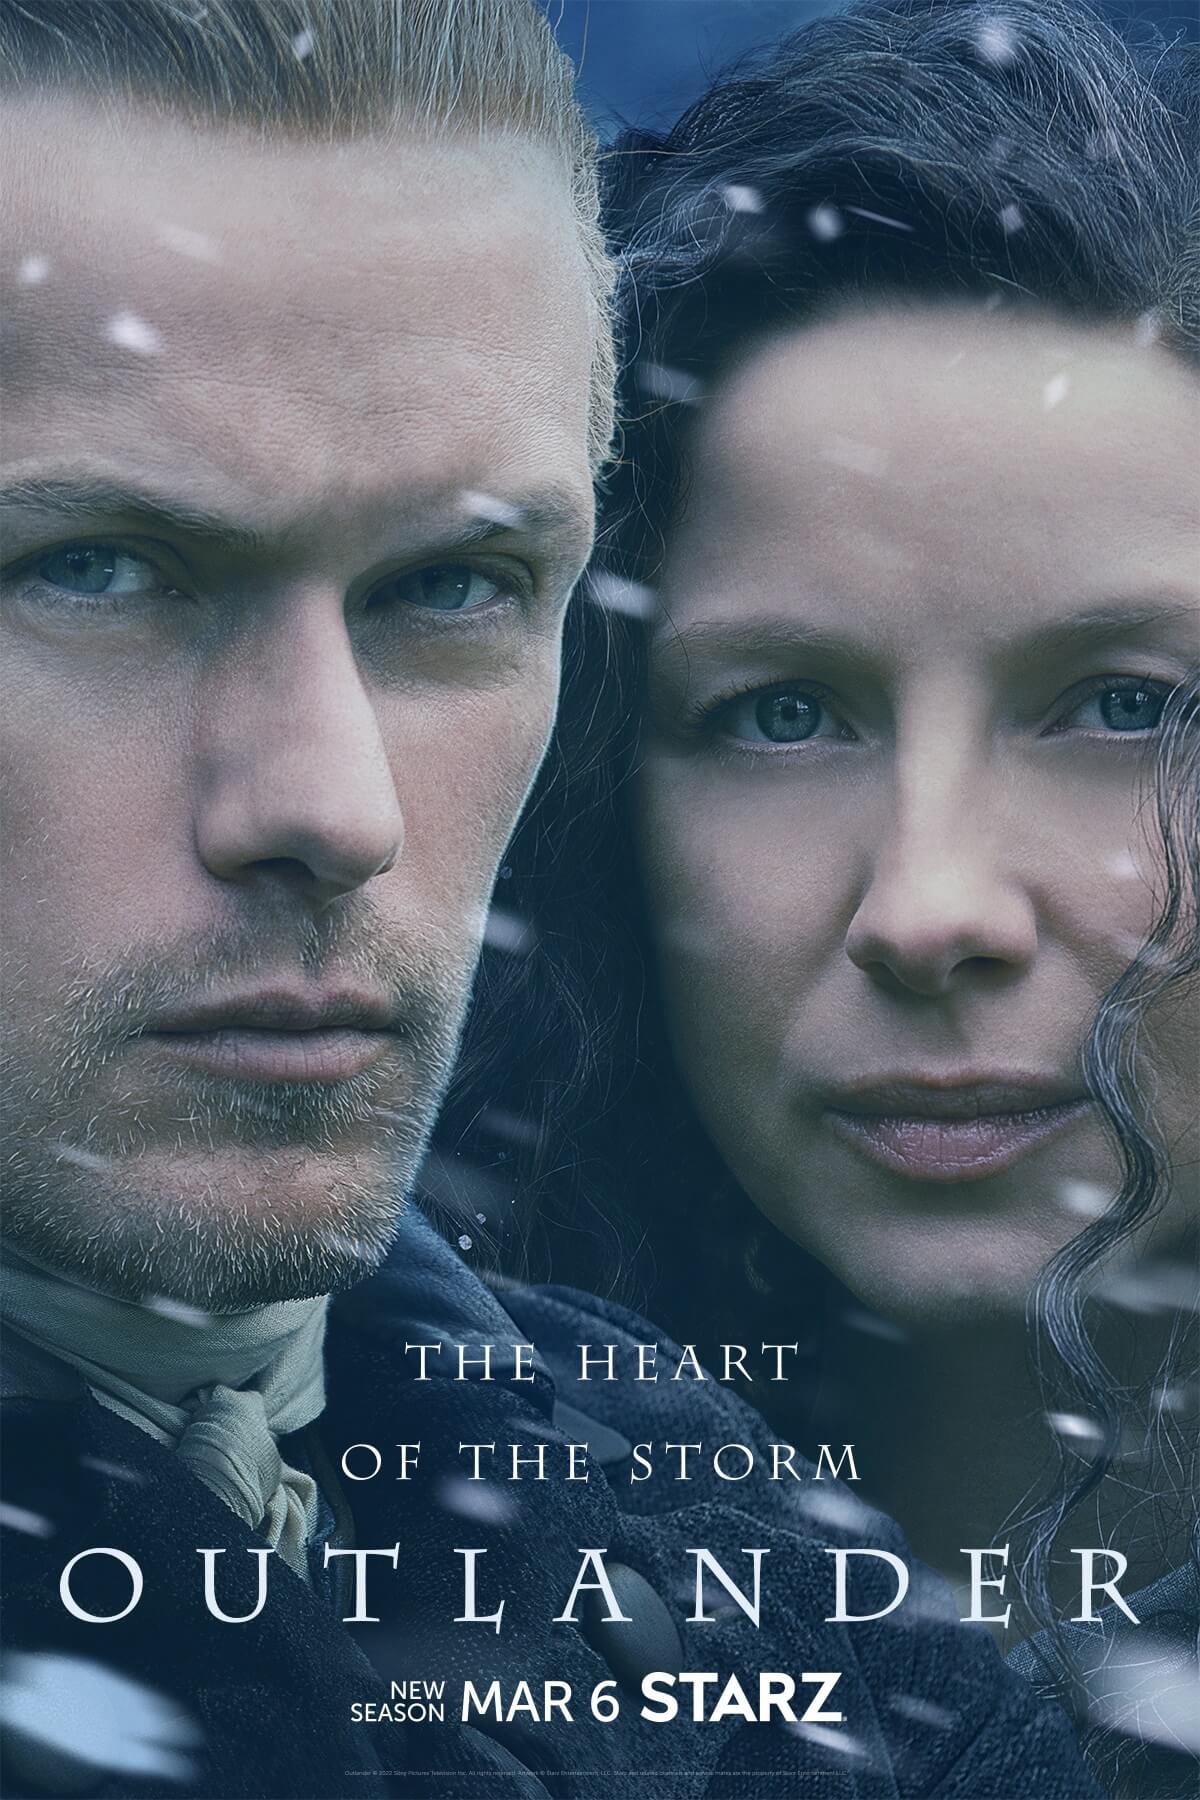 Outlander Season 6: Release Date, Plot, Episode Schedule, and more updates